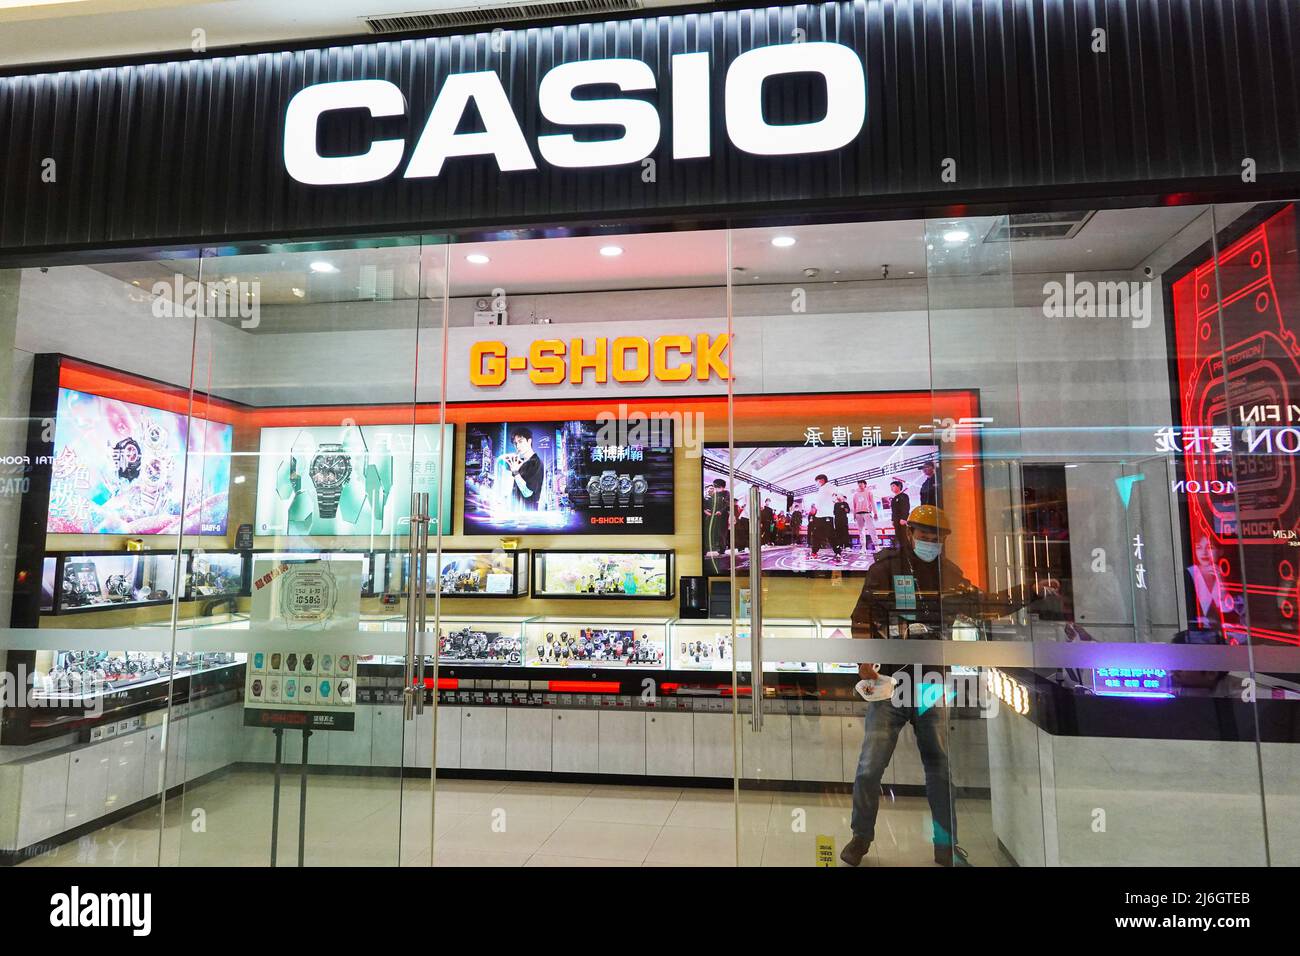 The Casio store is open in a mall Stock Photo - Alamy